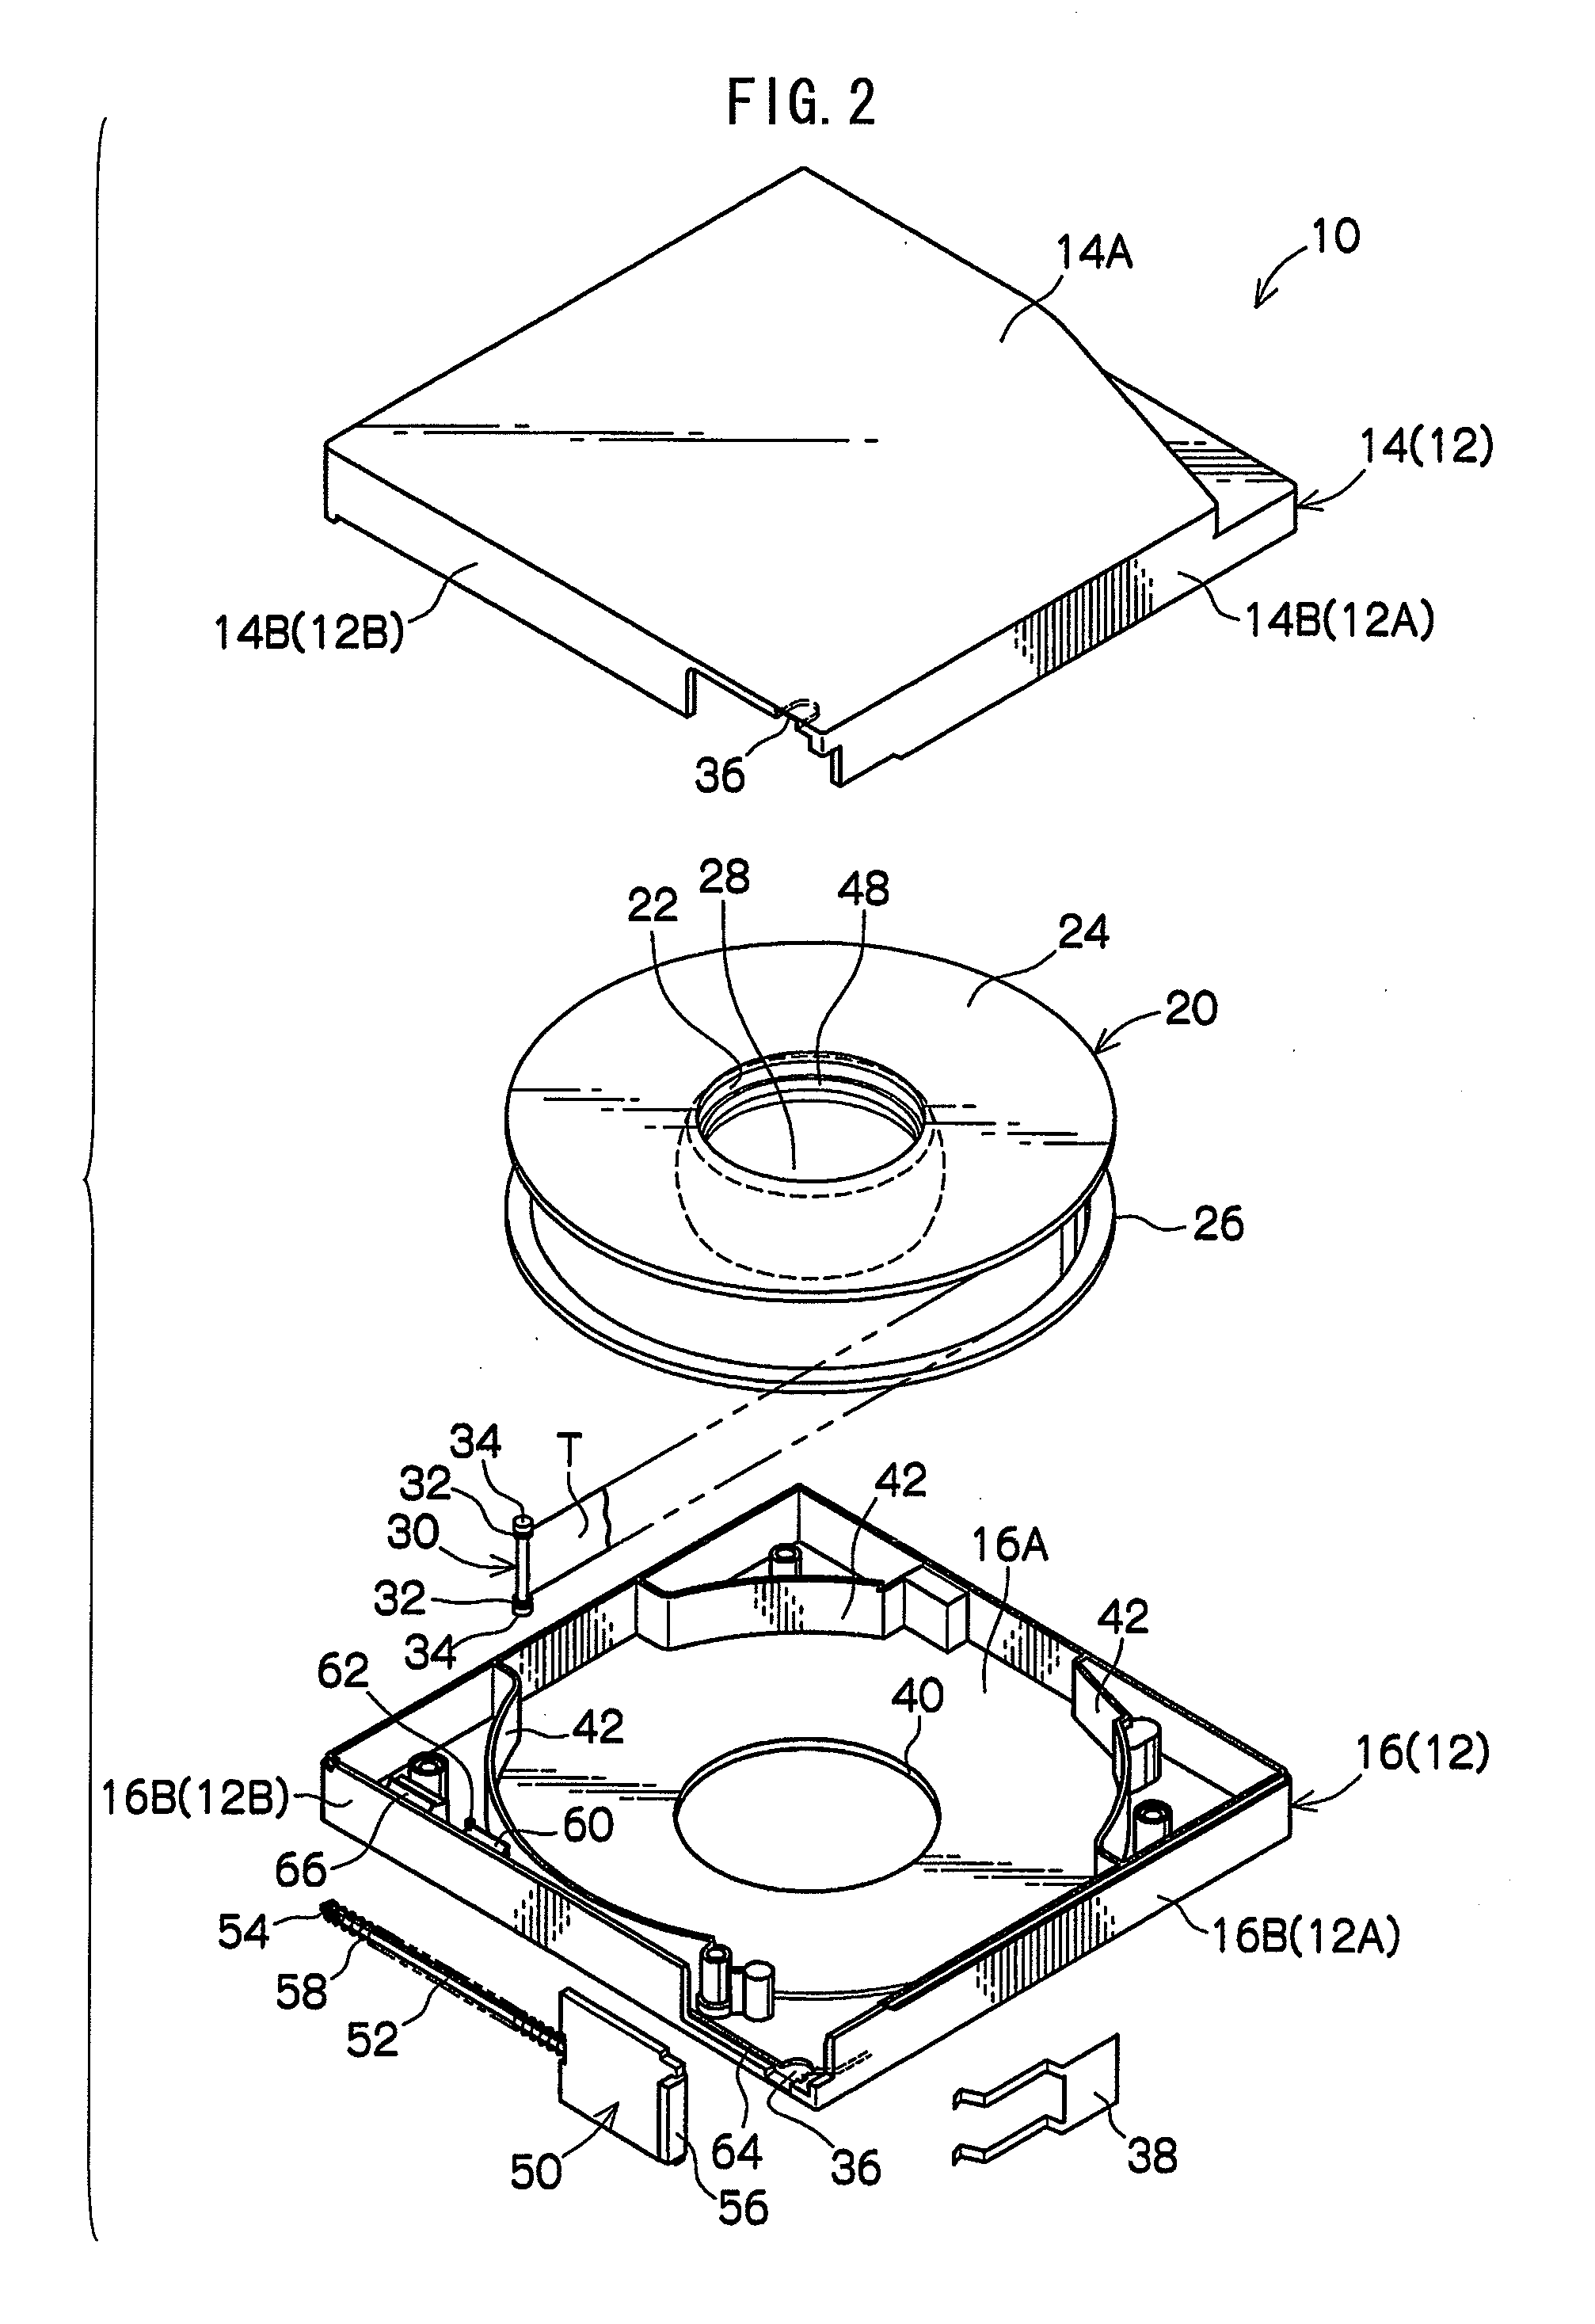 Tape reel, recording tape cartridge, take-up reel, and drive device